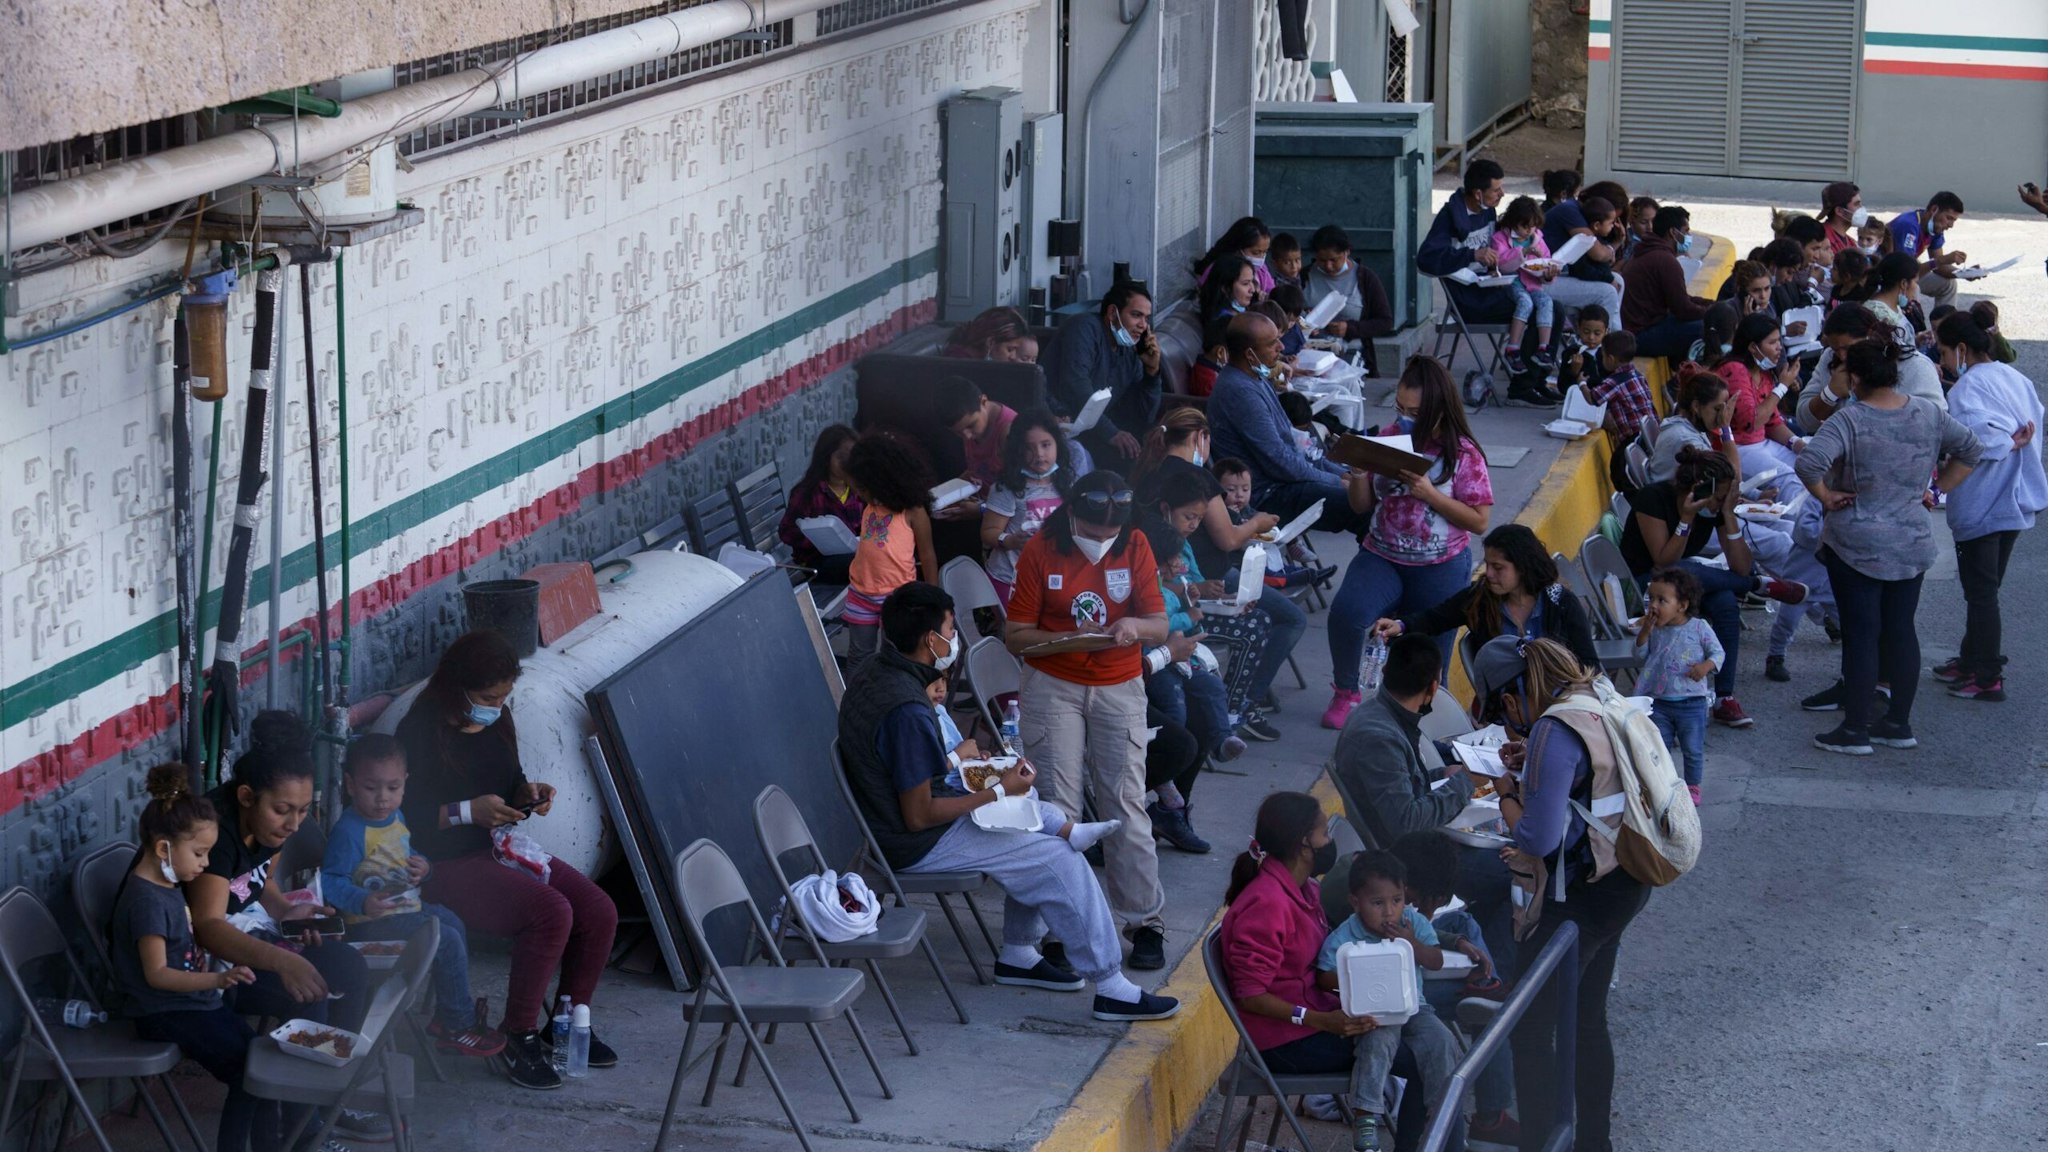 Migrants that crossed into the United States in the Rio Grande Valley and were flown to El Paso, Texas, rest at the Instituto Nacional de Migracion after being expelled to Mexico in Ciudad Juarez.